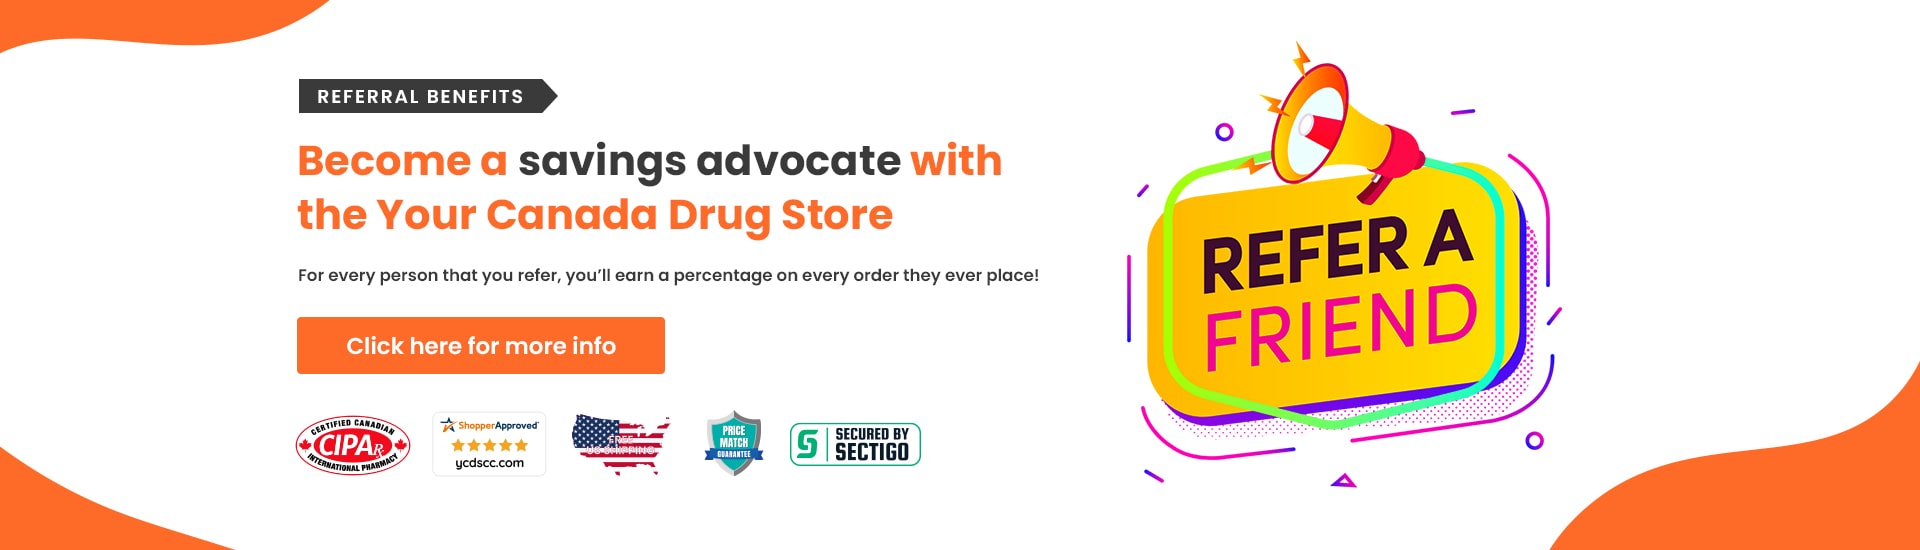 Referral benefits - Your Canada Drug Store